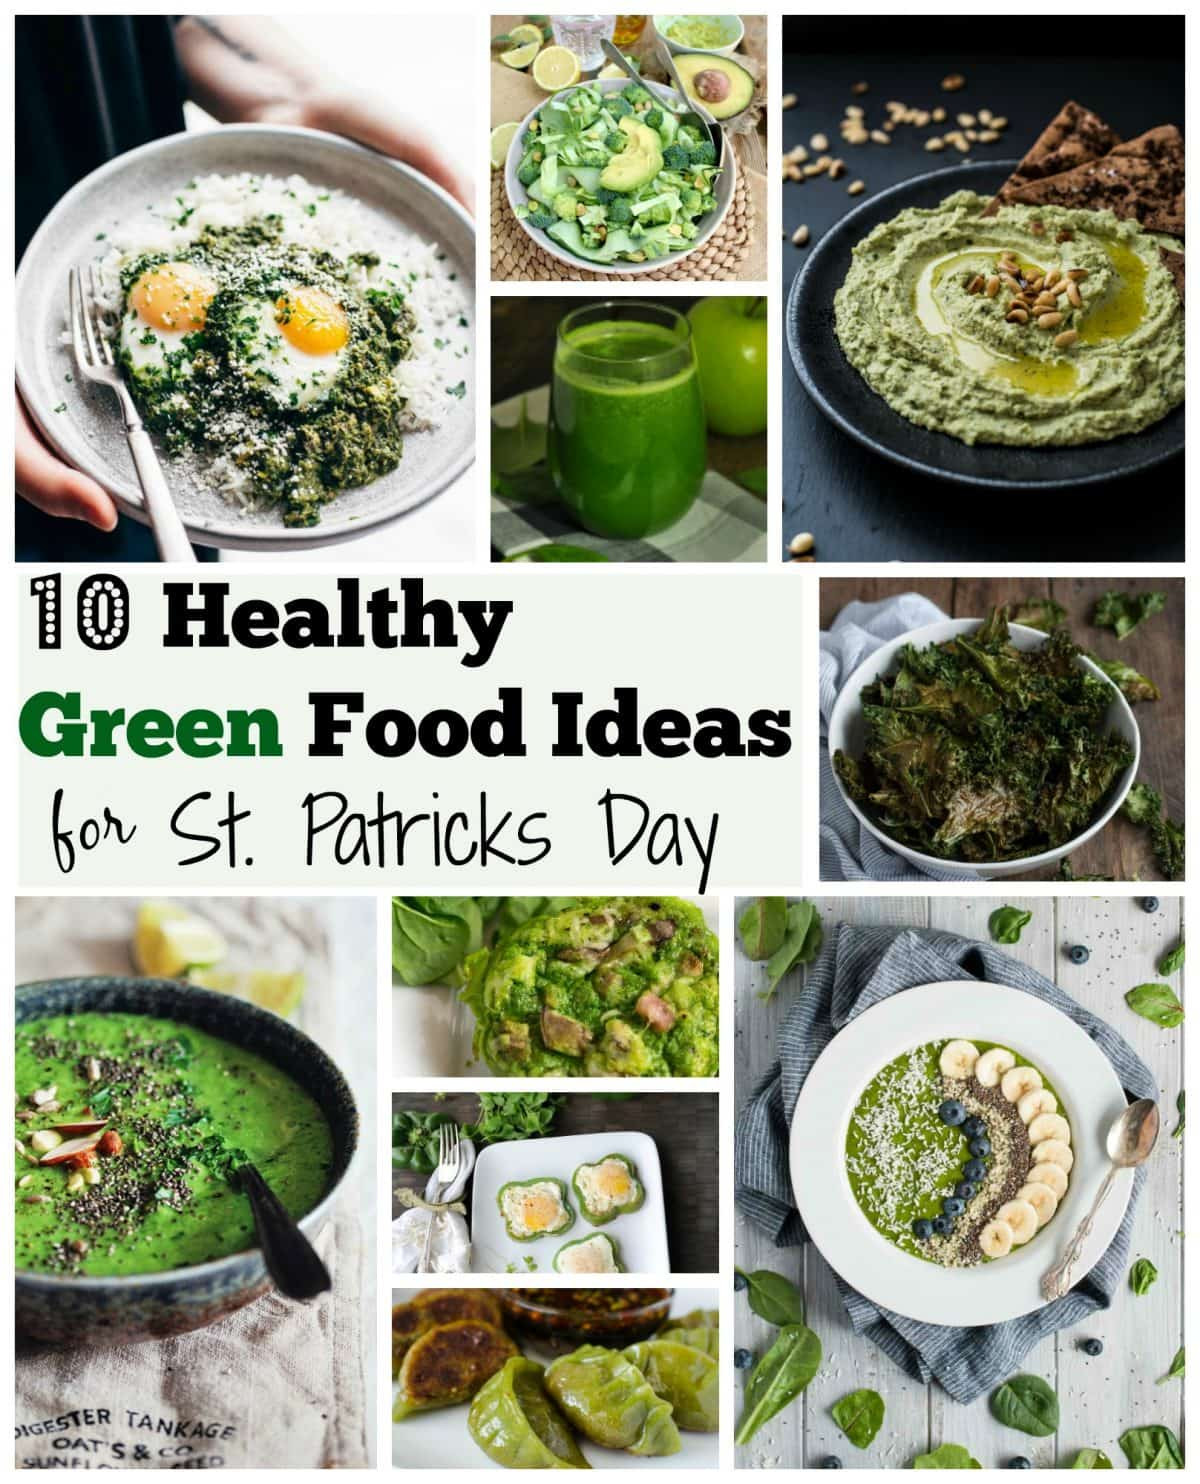 St Patrick's Day Meal Ideas
 10 Healthy Green Food Ideas for St Patricks Day